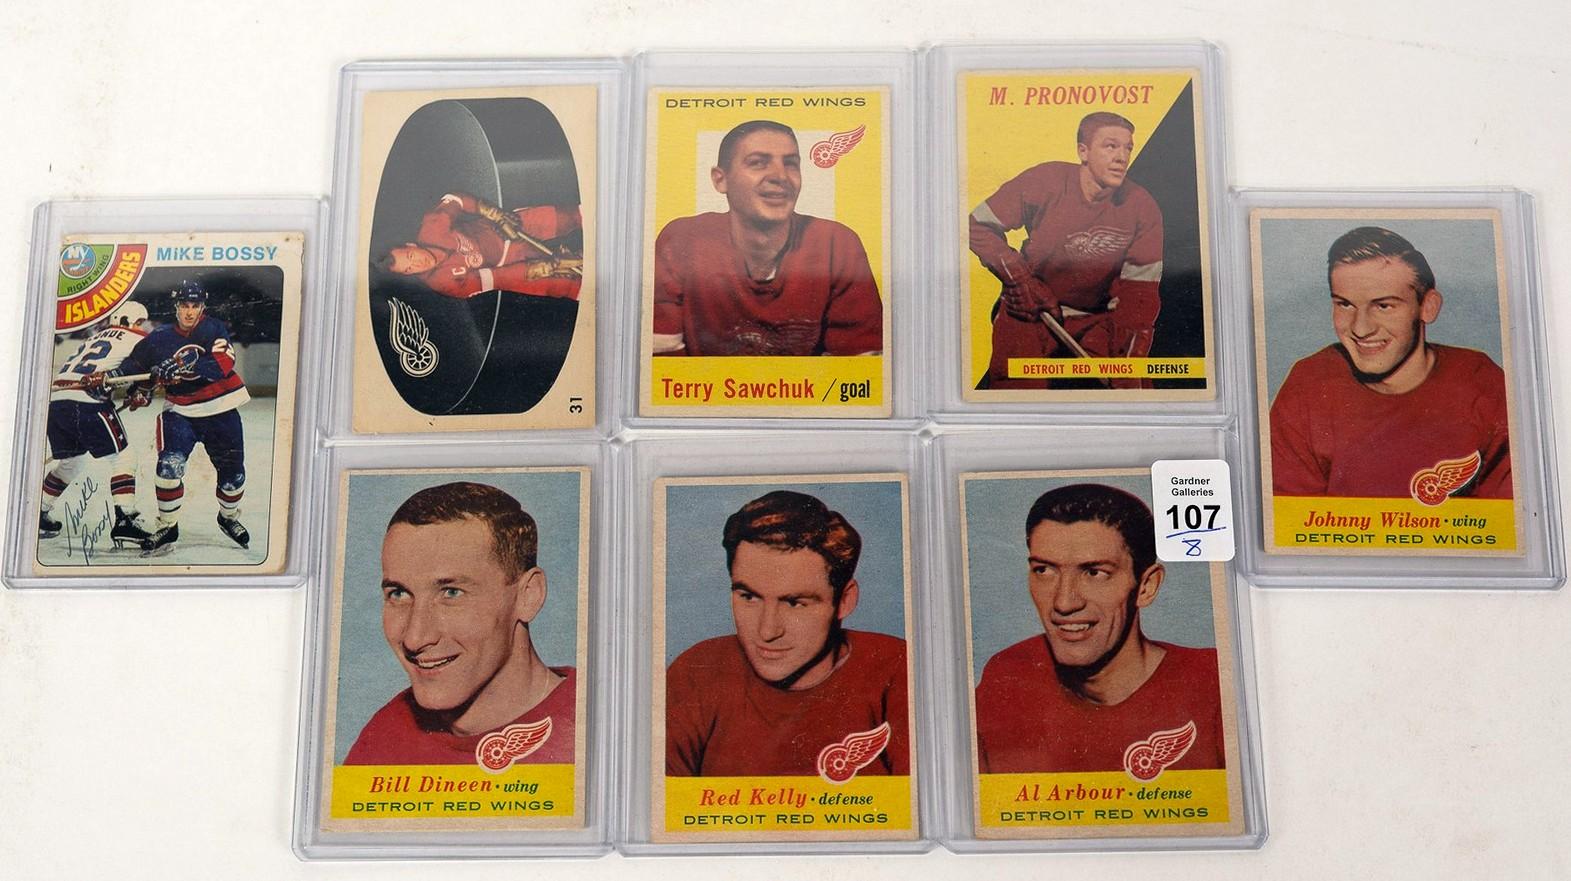 7 DETROIT RED WINGS CARDS AND MIKE BOSSY ROOKIE